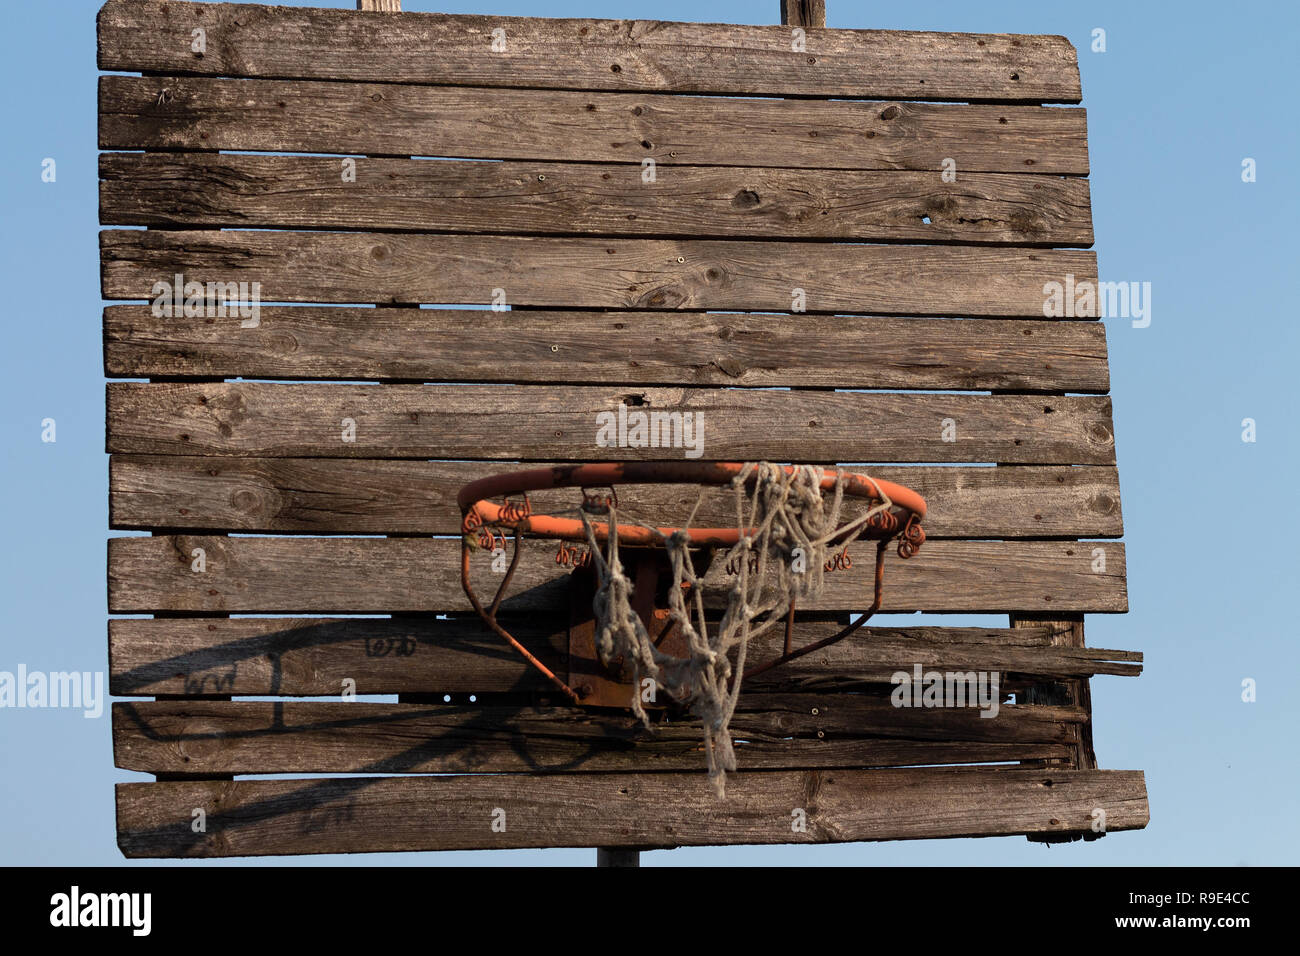 Old and rusty basketball hoop with tangled net Stock Photo